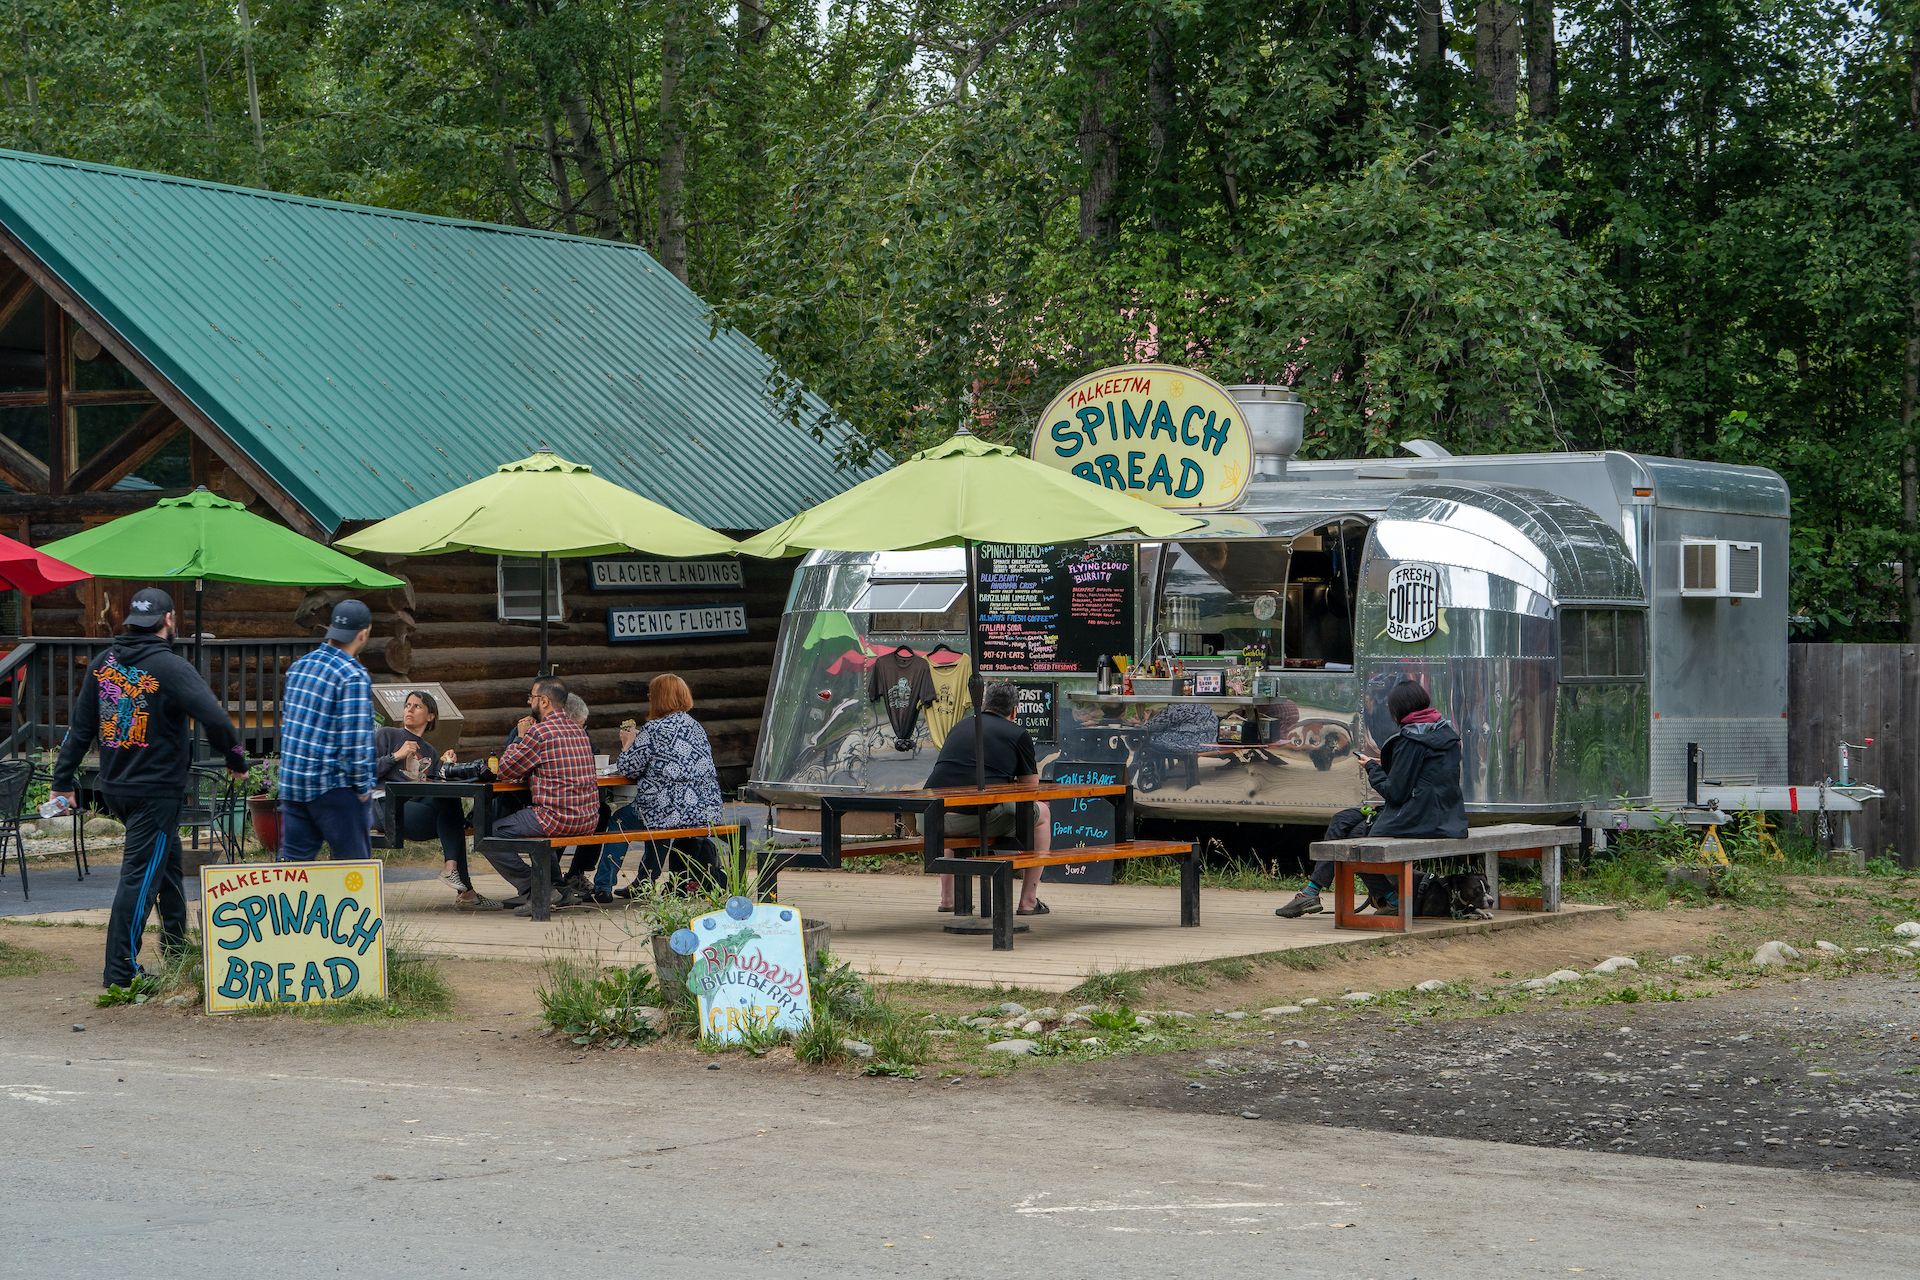 The Spinach Bread food truck was a popular choice for lunch.